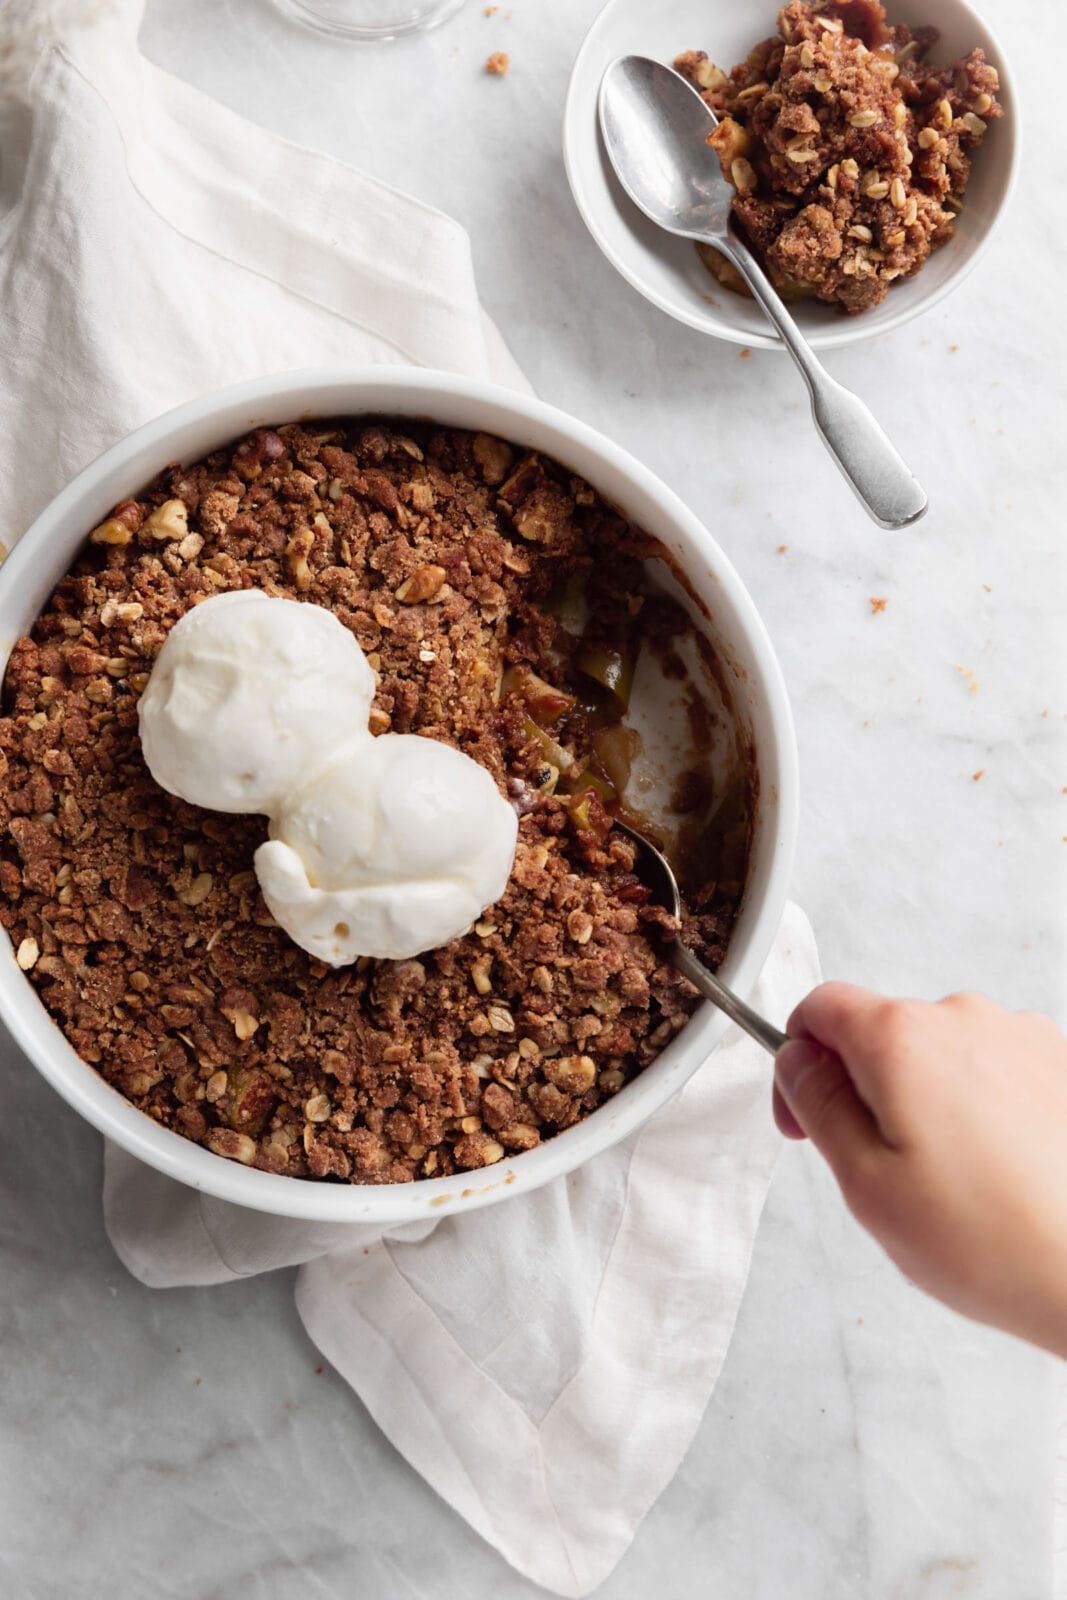 apple crisp with maple syrup and walnuts